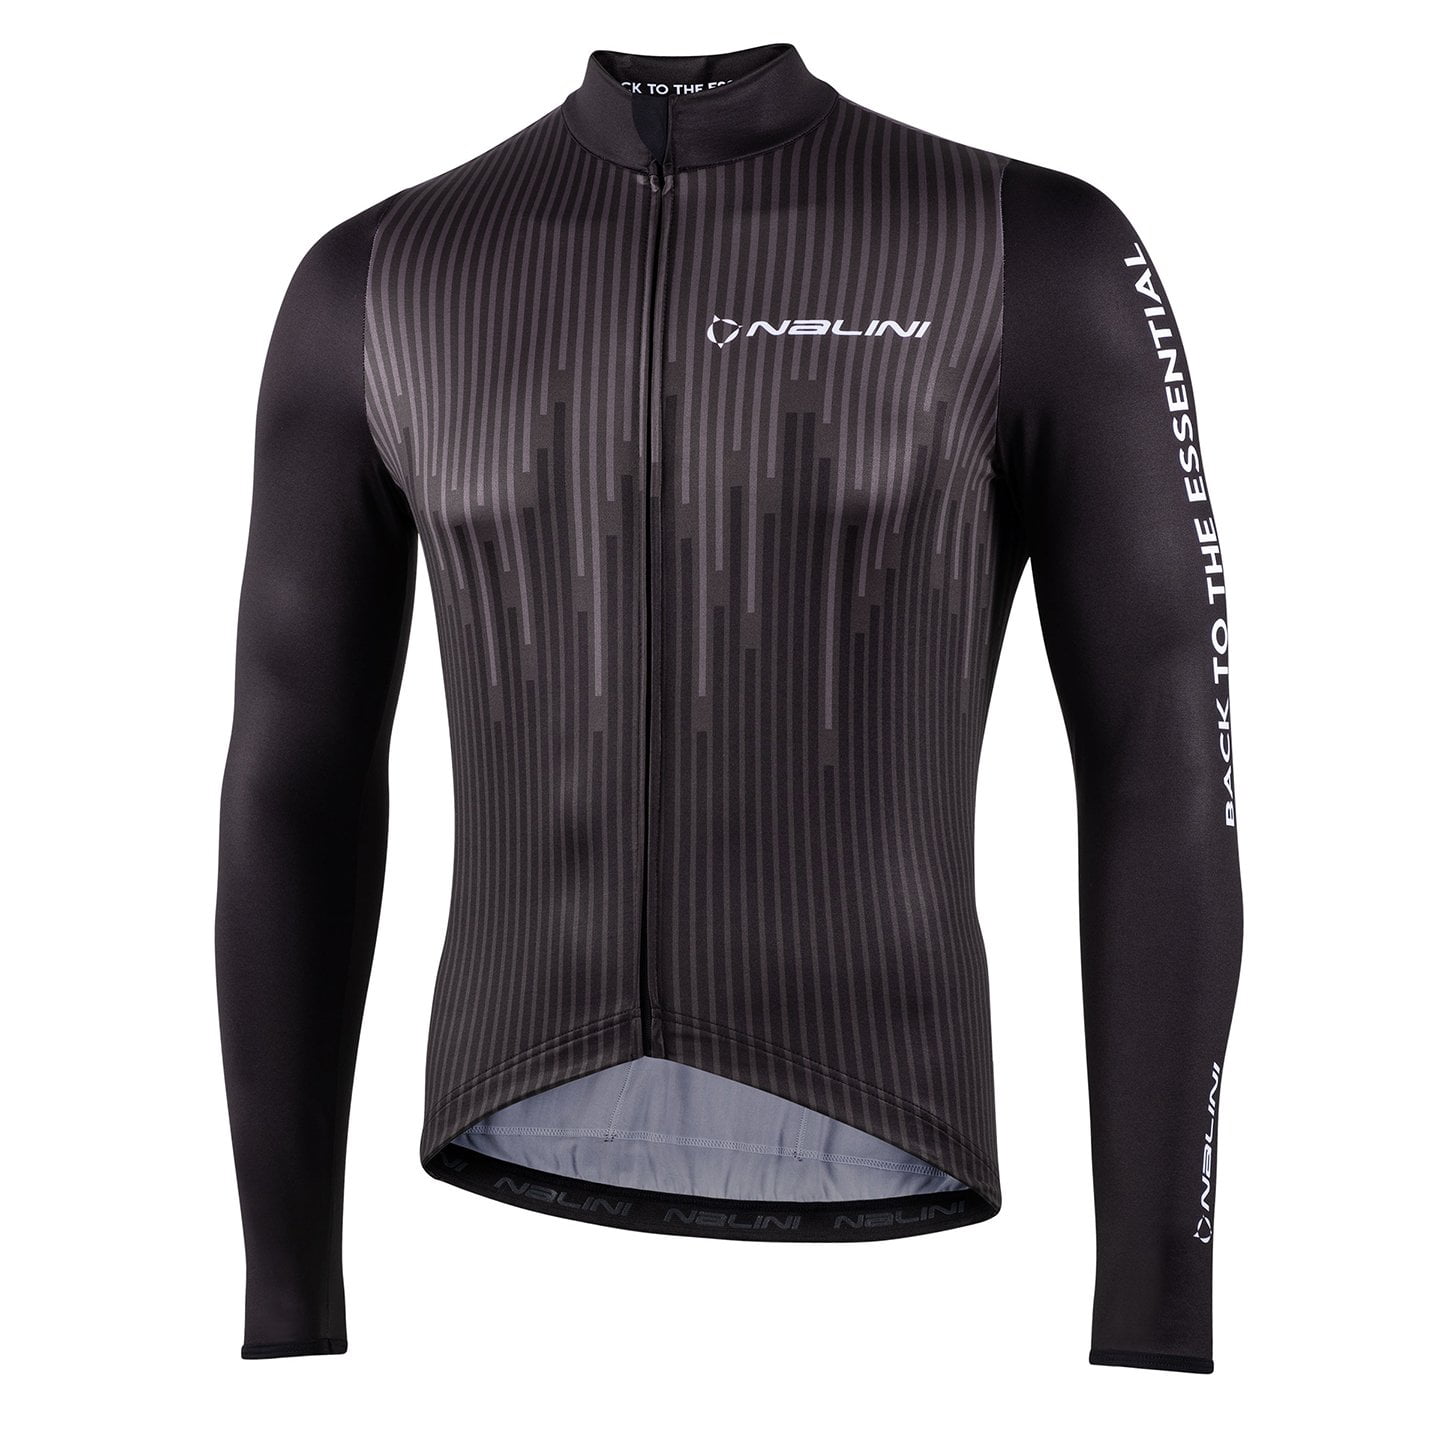 NALINI Fit Long Sleeve Jersey Long Sleeve Jersey, for men, size 2XL, Cycling jersey, Cycle clothing